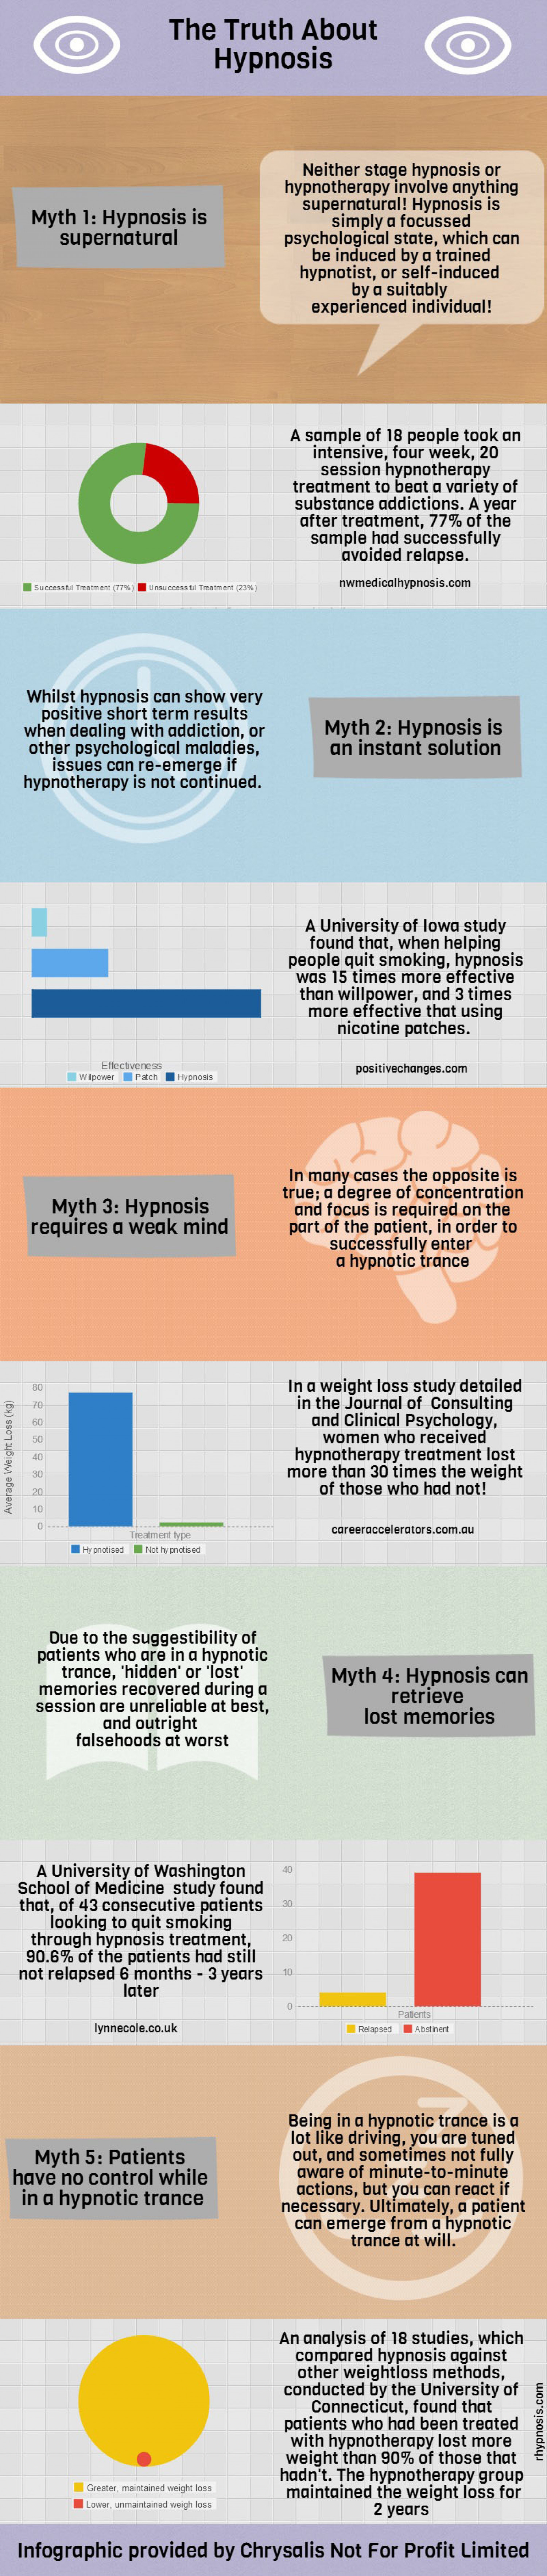 The Truths About Hypnosis Infographic